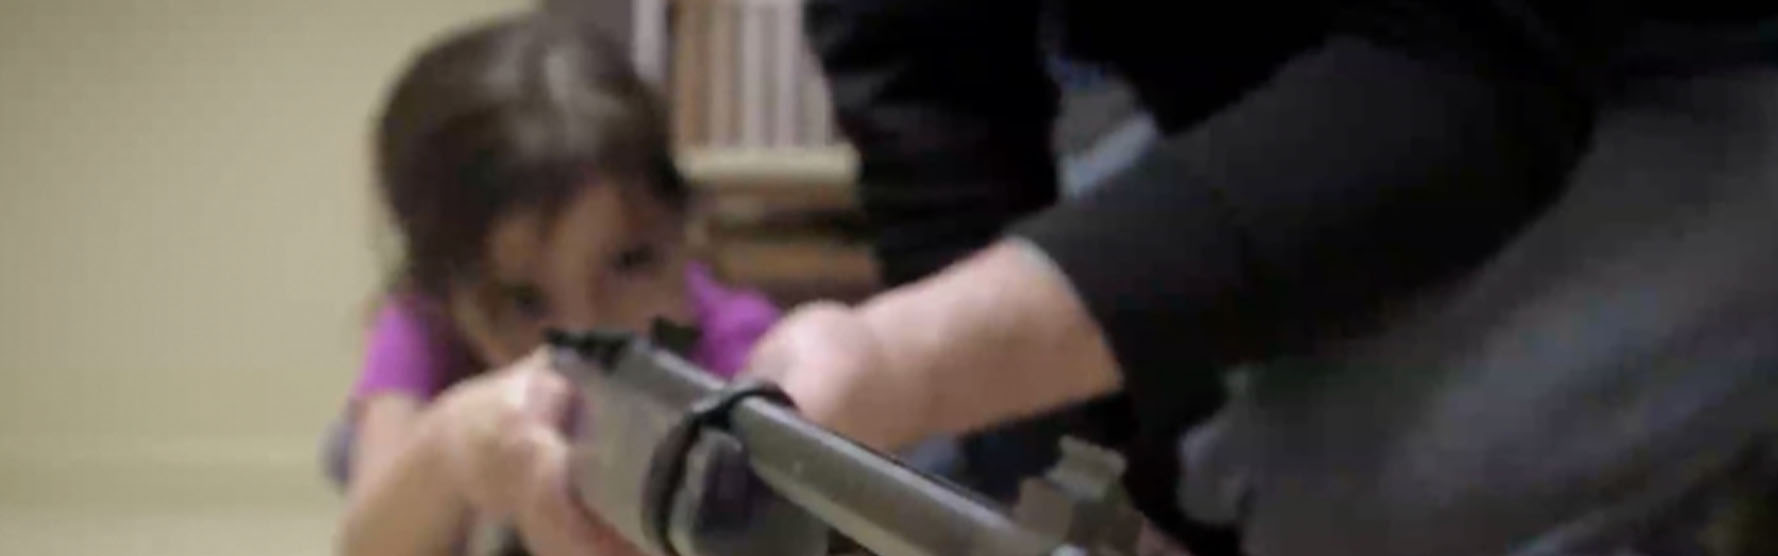 Guns In The USA: Child's Play?